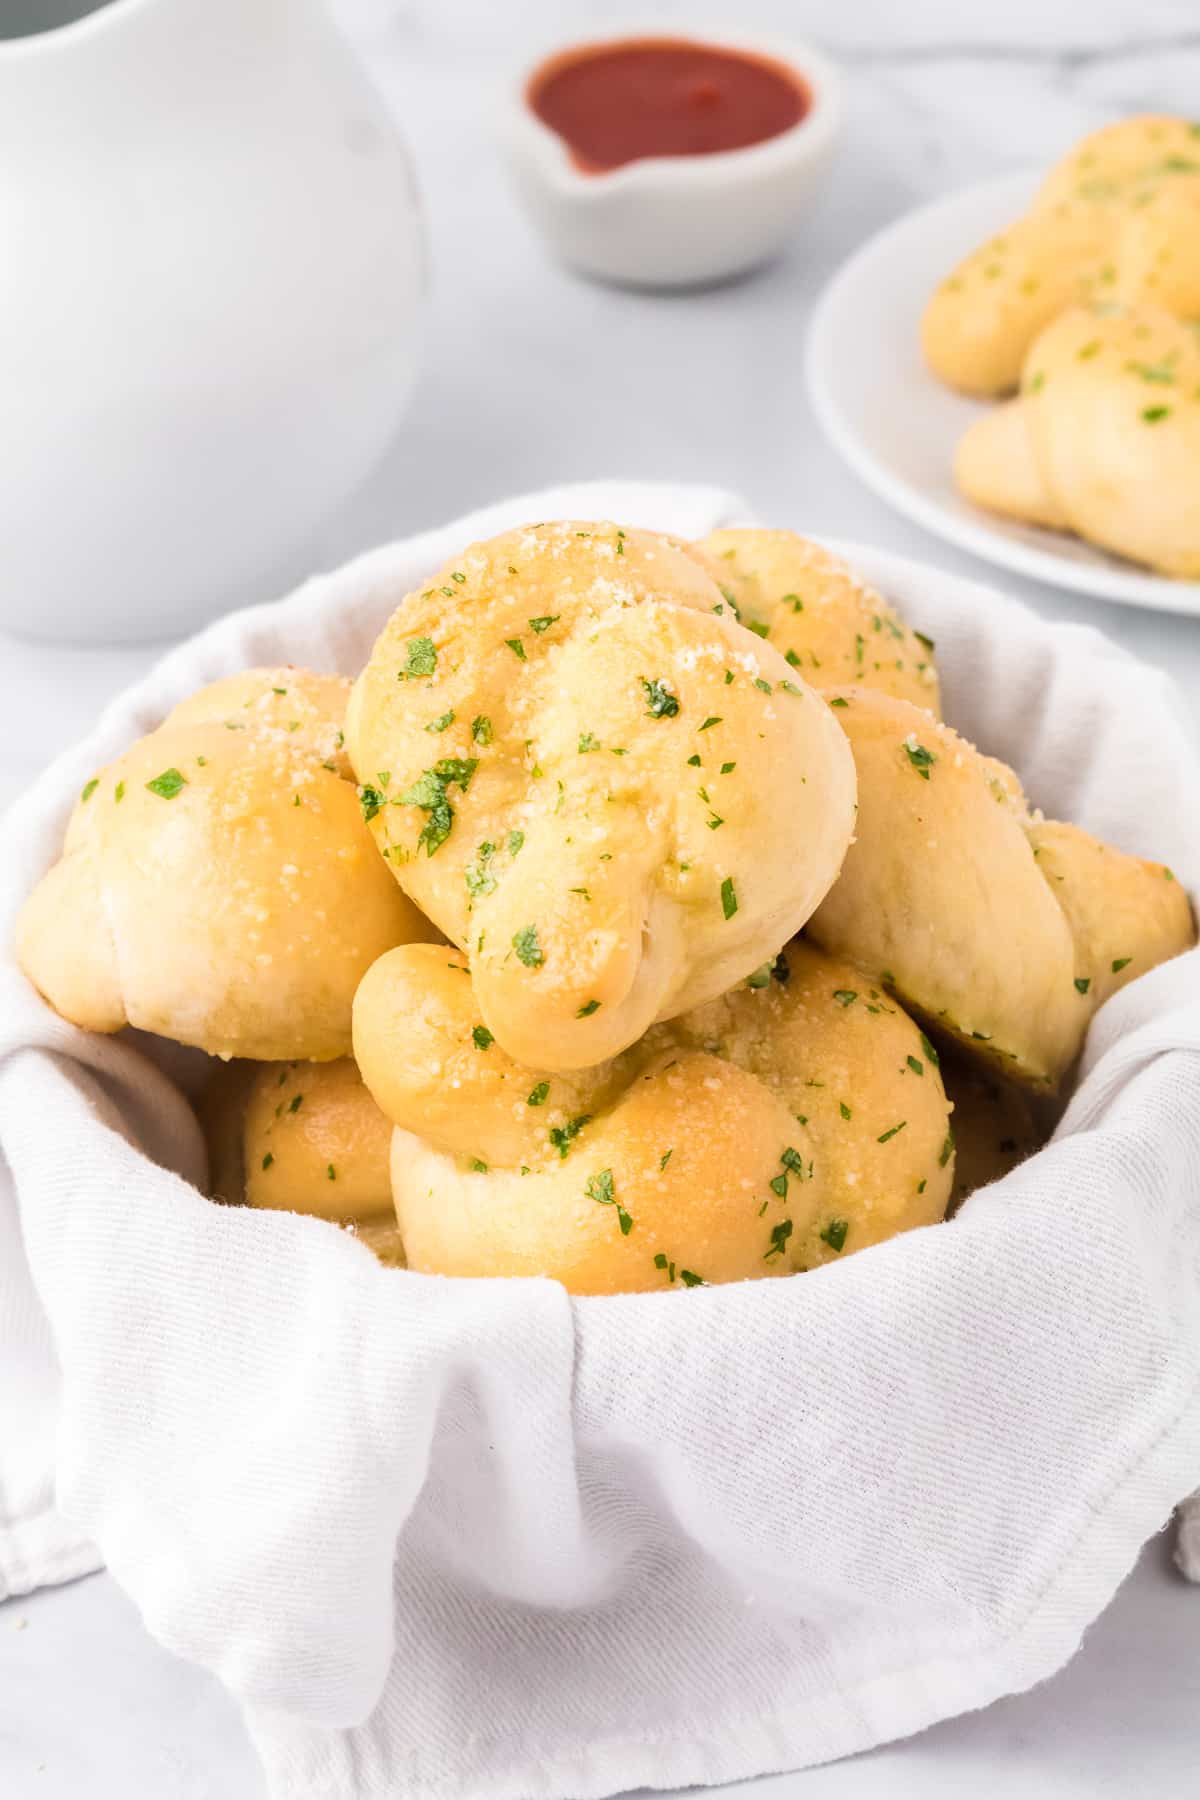 Garlic knots in a bread bowl with a small bowl of tomato sauce and a plate with more garlic knots in the background on a counter.